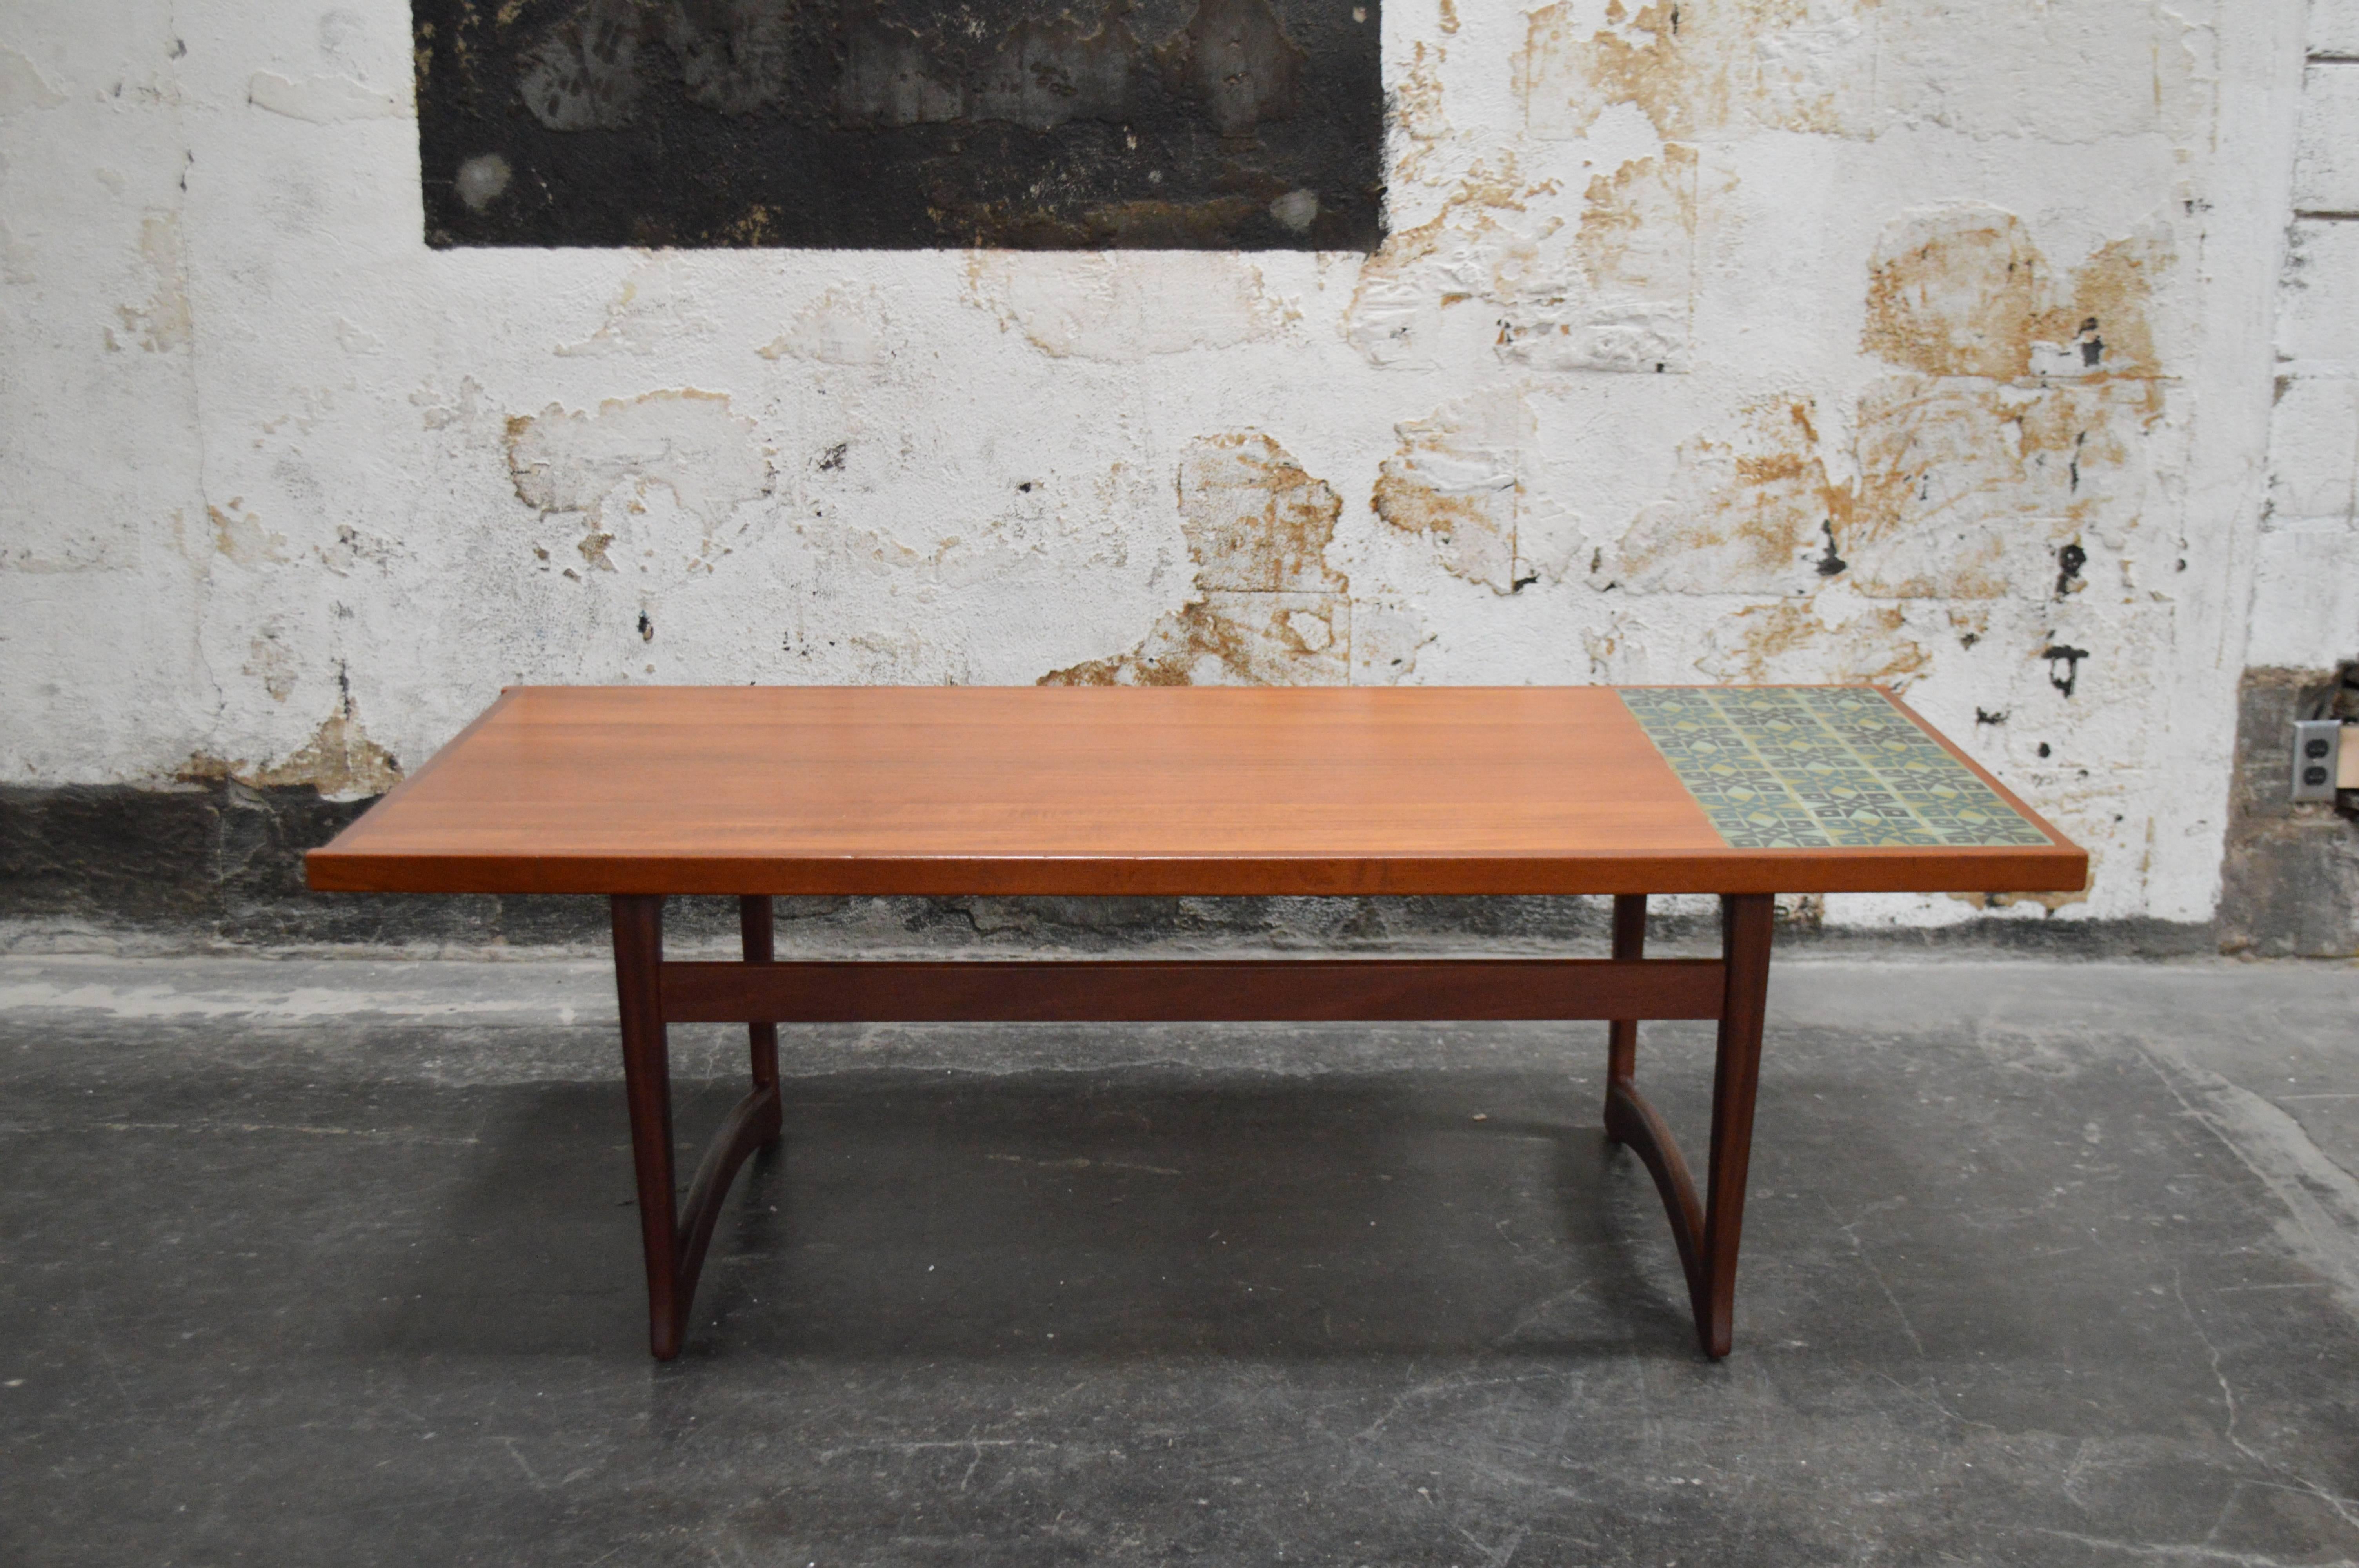 This handsome table is generously sized and very sturdy. It features a section of decorated tile in shades of green. The top is teak and the base is of mahogany which creates a nice contrast. Made by Ganddal Mobelfabrikk, circa 1960s. It has been